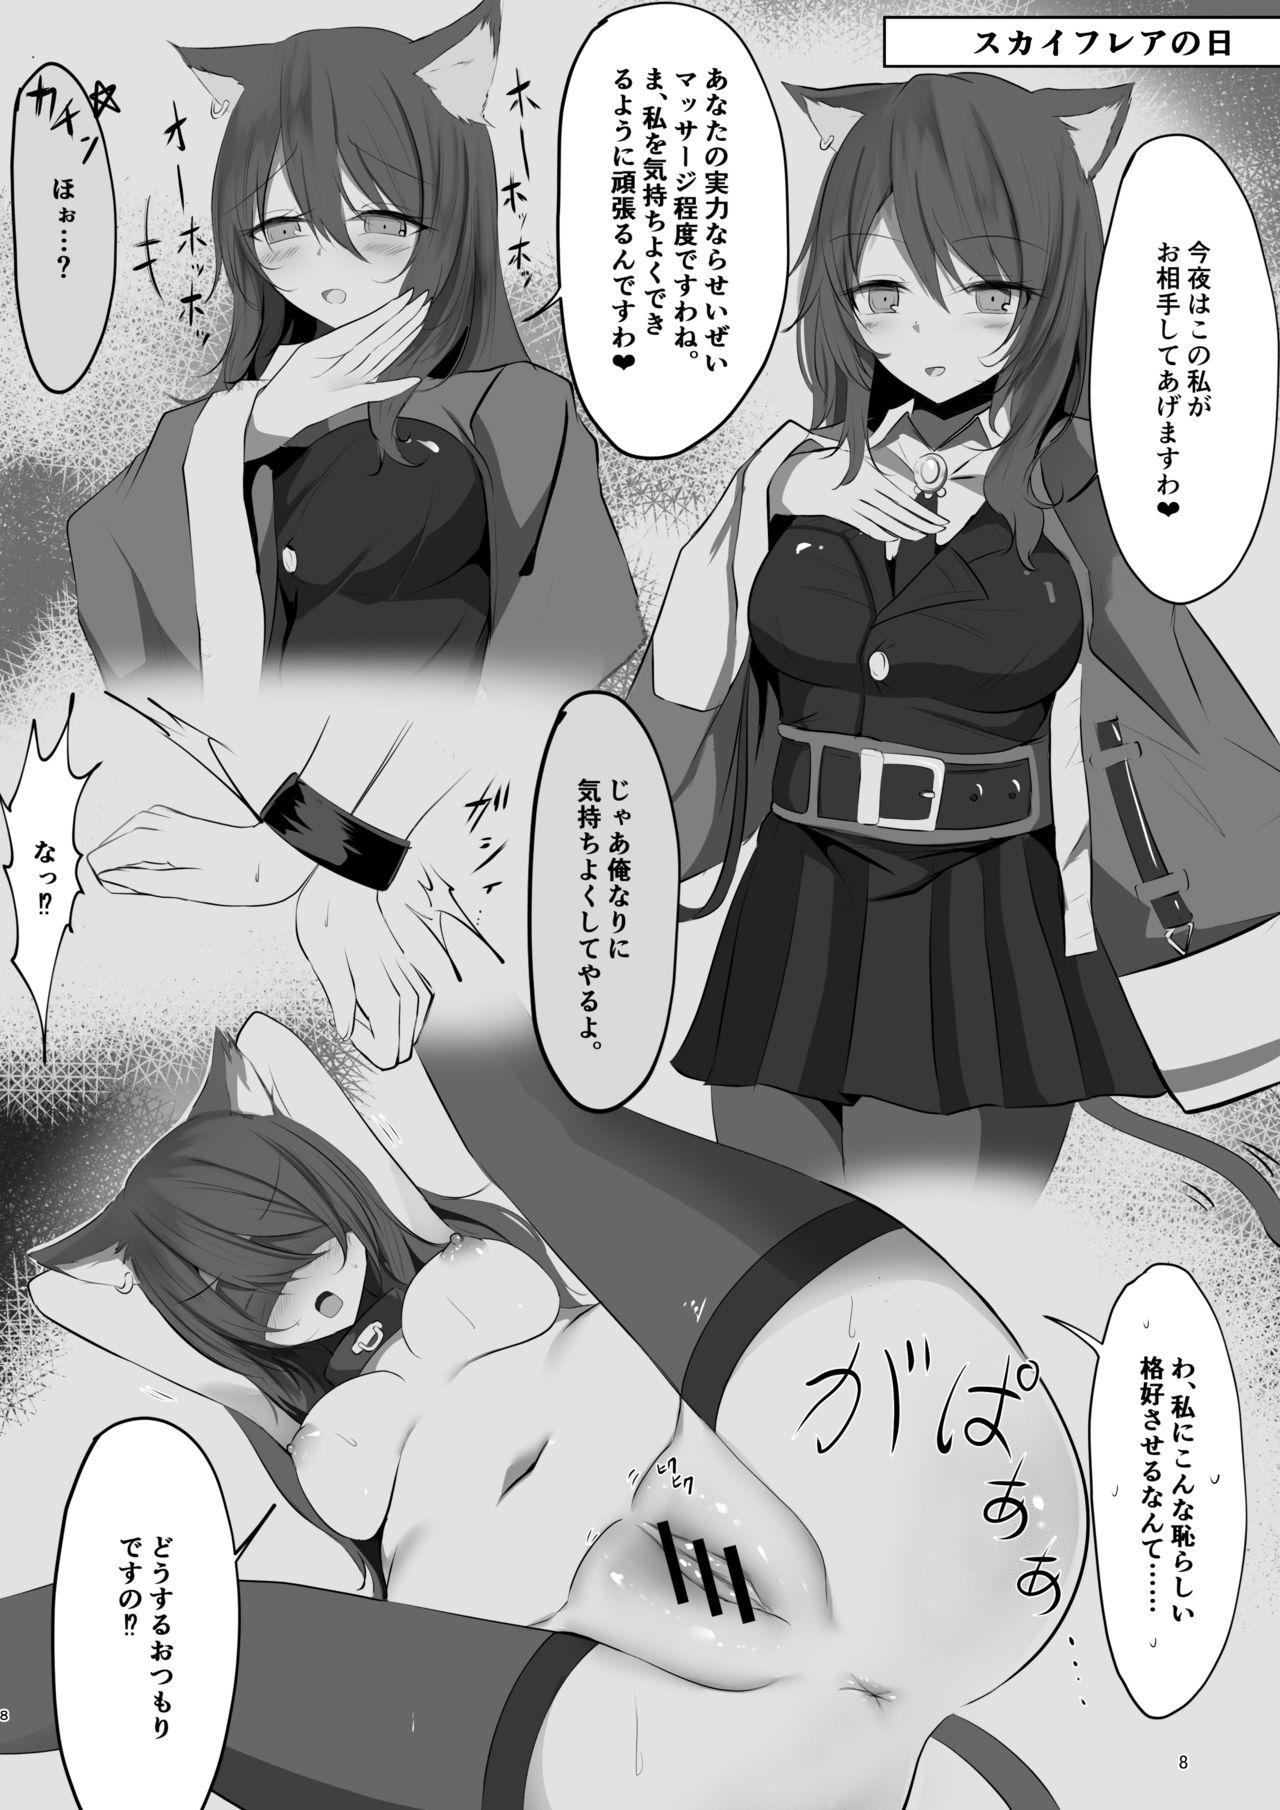 Hugecock 夜な夜な扇情作戦記録 - Arknights Wives - Page 8